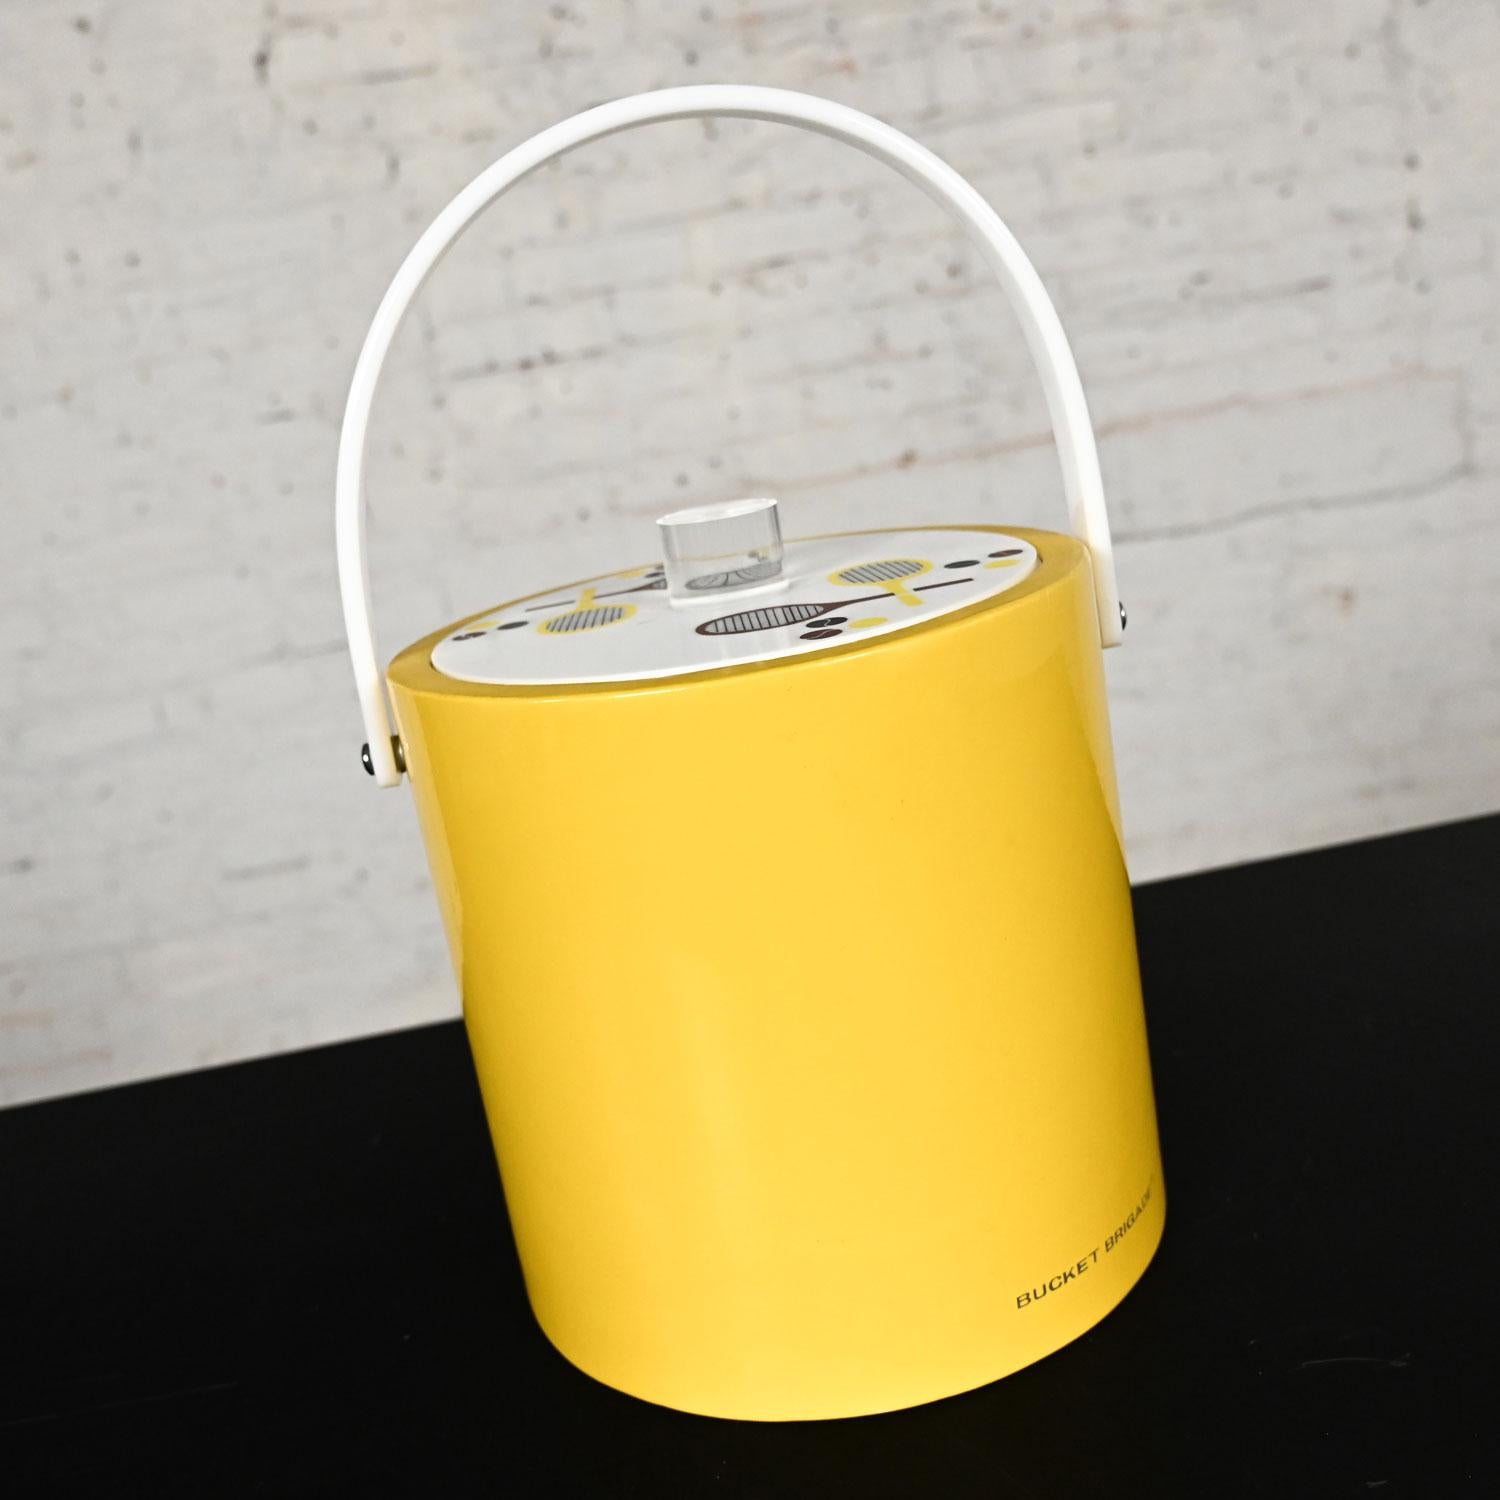 Handsome vintage MCM or Mid-Century Modern Morgan & Company Bucket Brigade yellow faux patent leather ice bucket with tennis designs on a plexiglass lid, lucite knob, white lucite handle, and plastic inside lining. Beautiful condition, keeping in